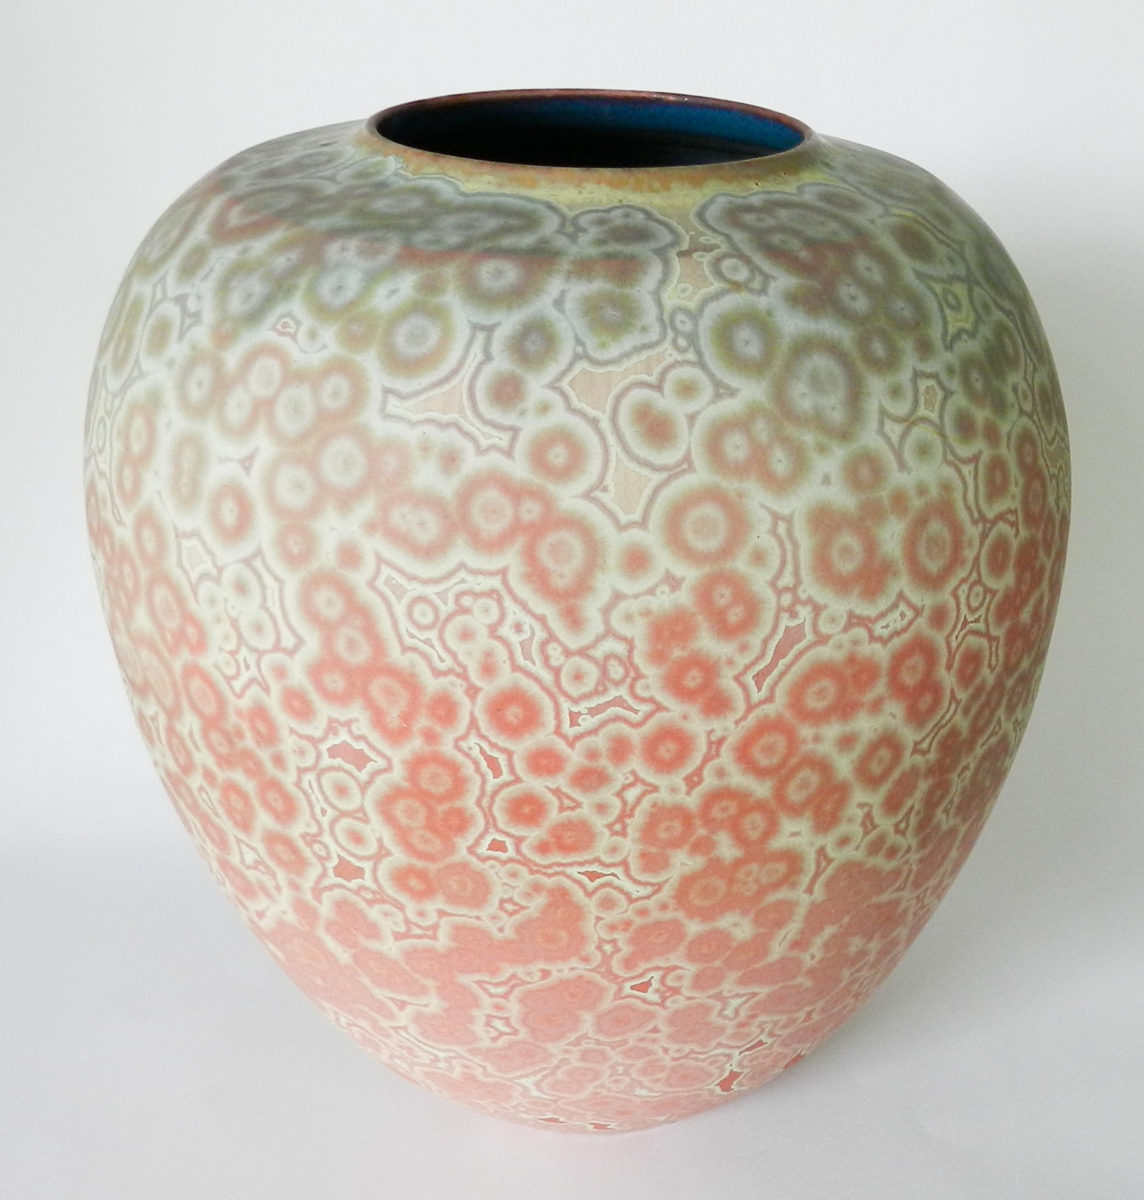 Coral Connections | Dennis Forshaw | large vessel with matt crystalline glaze | 30 x 25 cm | $1350